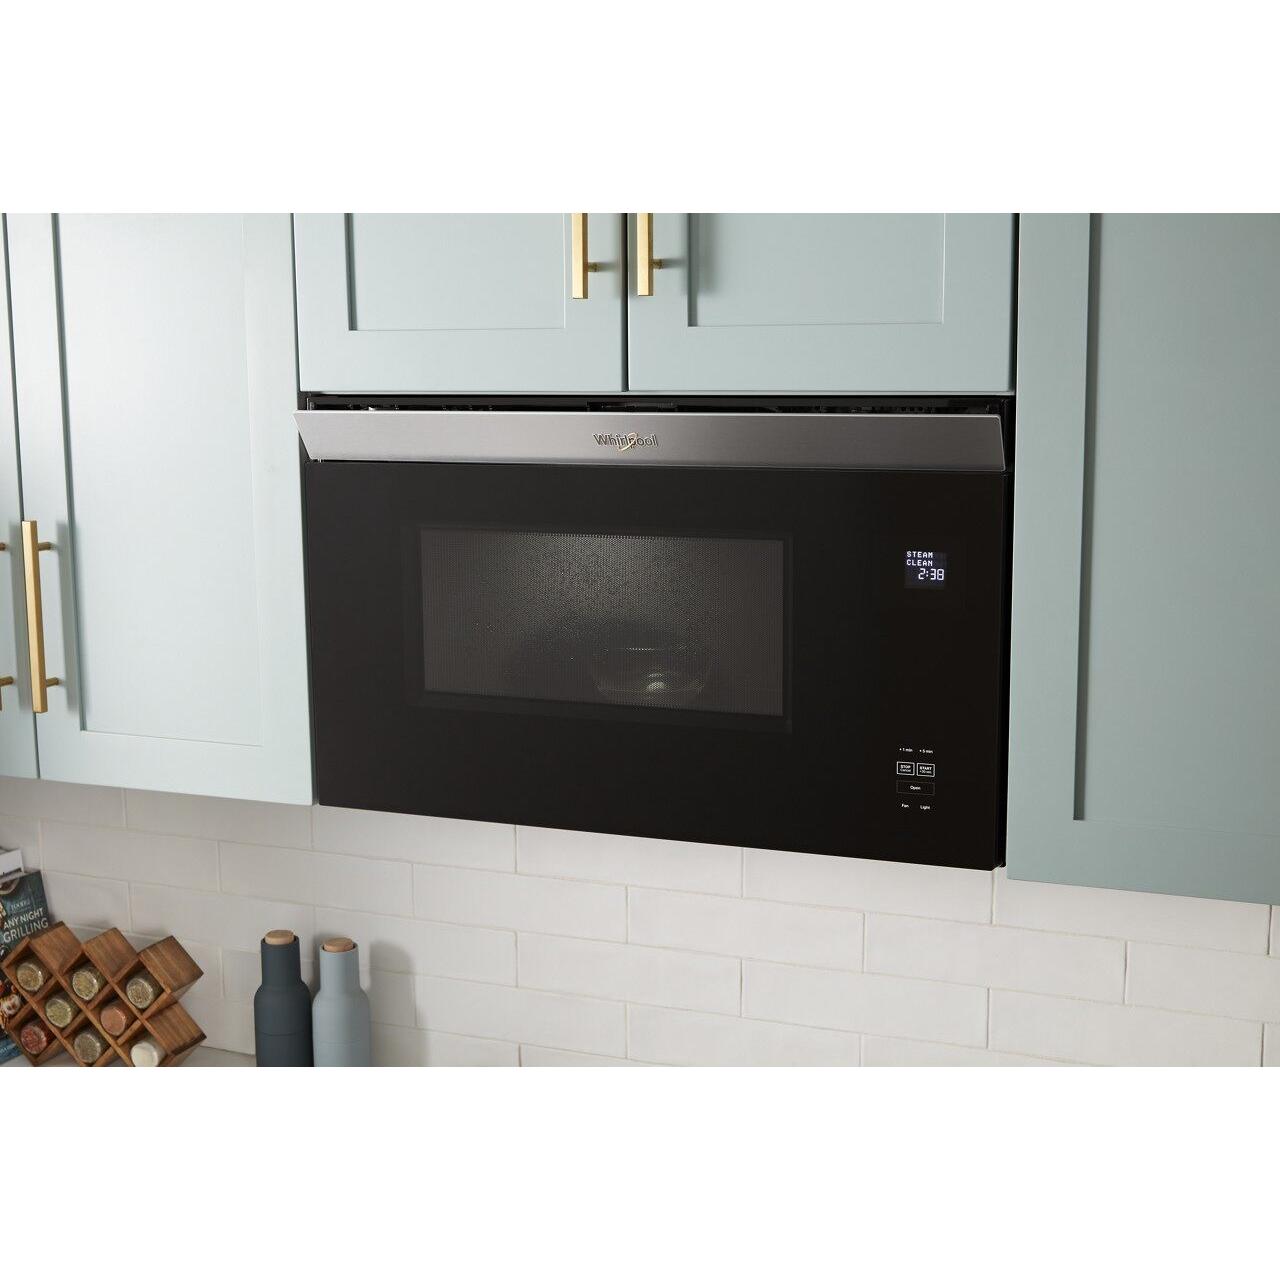 Whirlpool 30-inch Over-the-Range Microwave Oven WMMF5930PZ